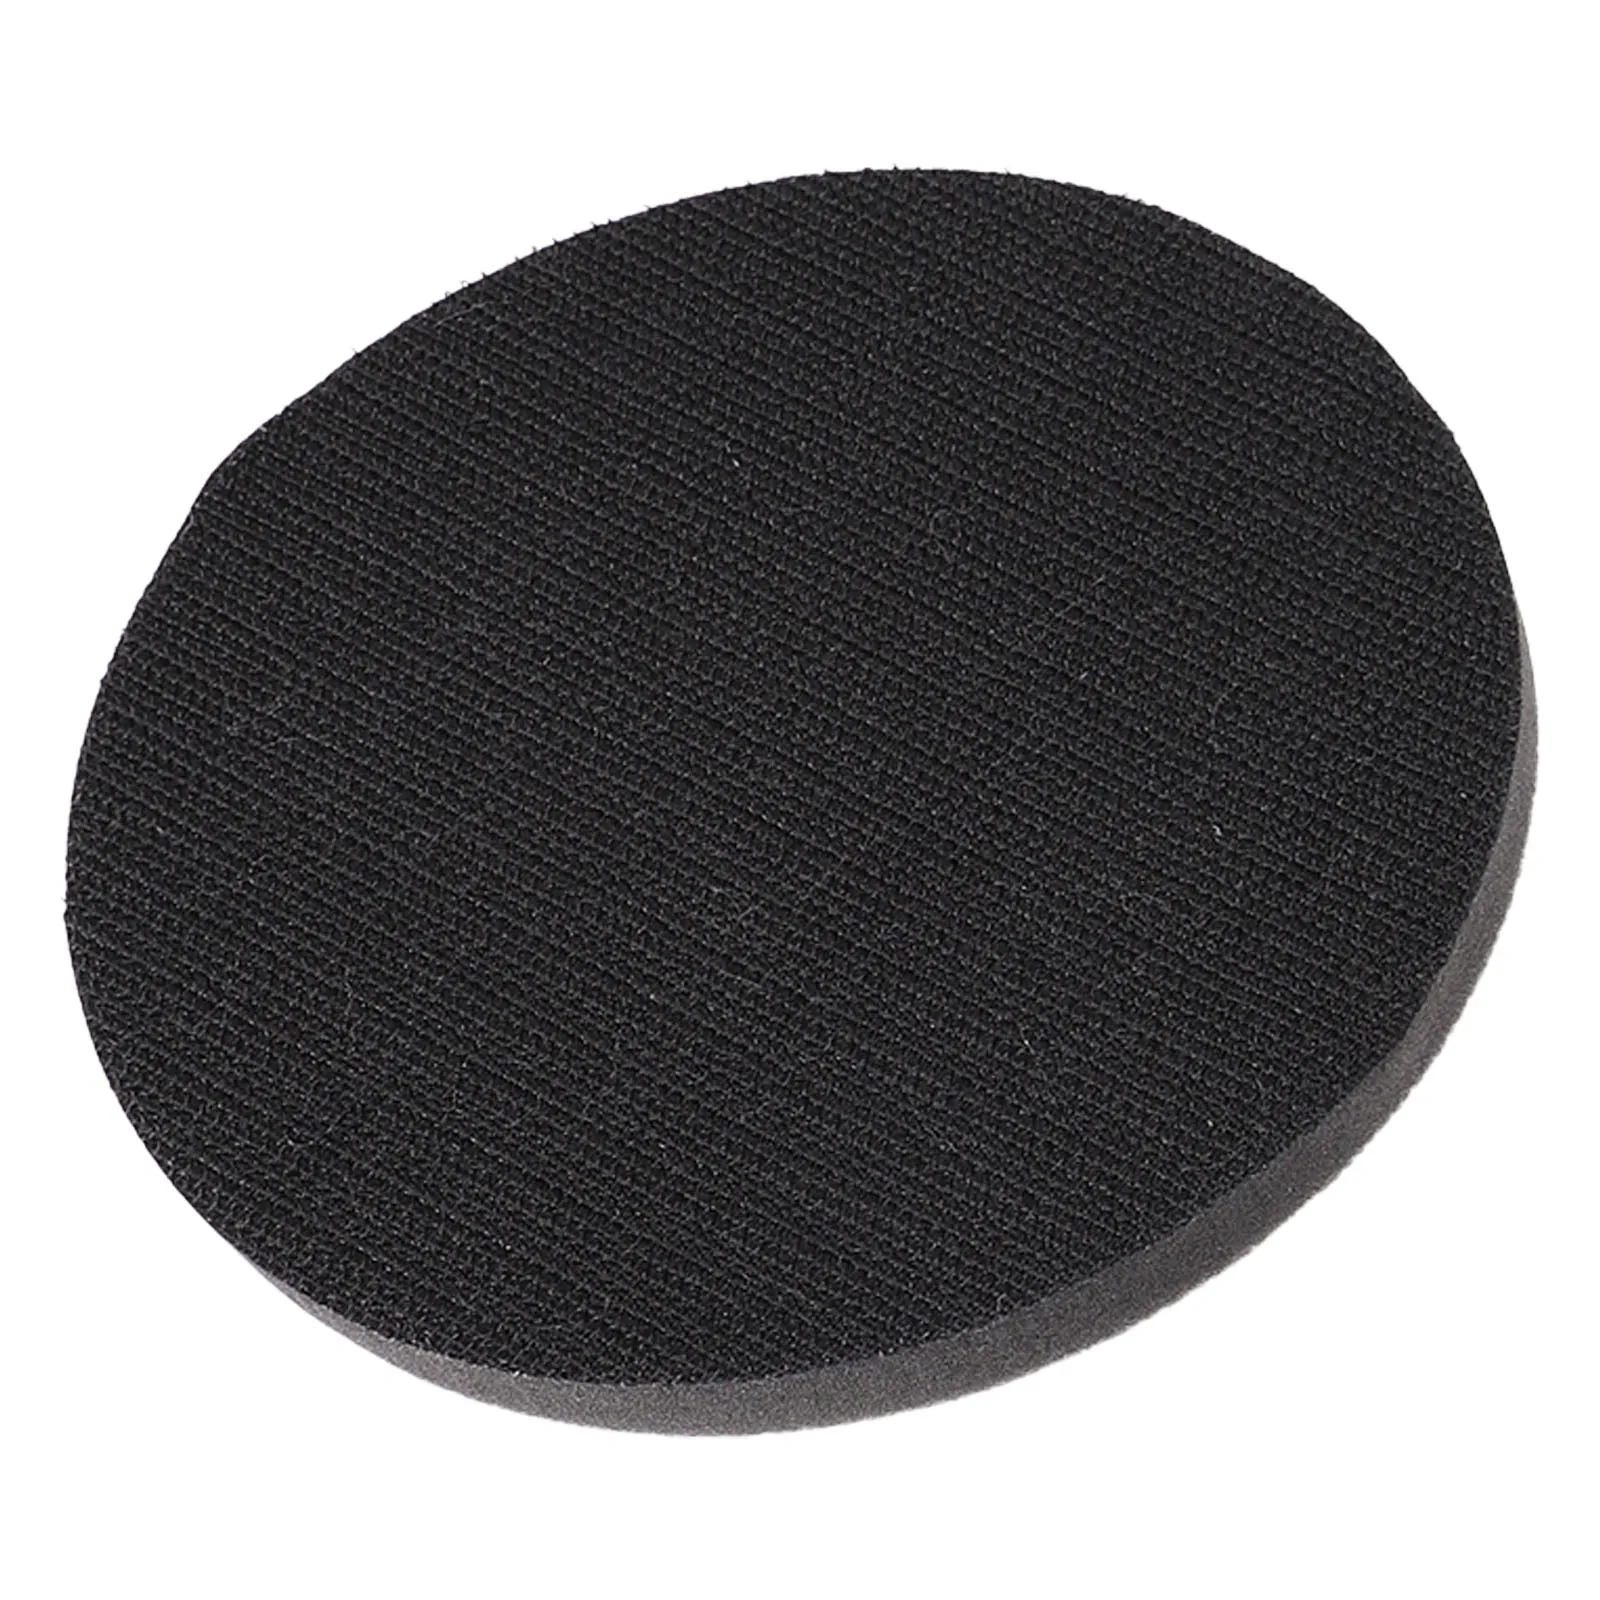 

Sponge Buffering Pad Power Tools Accessories 5inch/6inch/7inch Convenient Replacement Interface Pad Soft Sponge